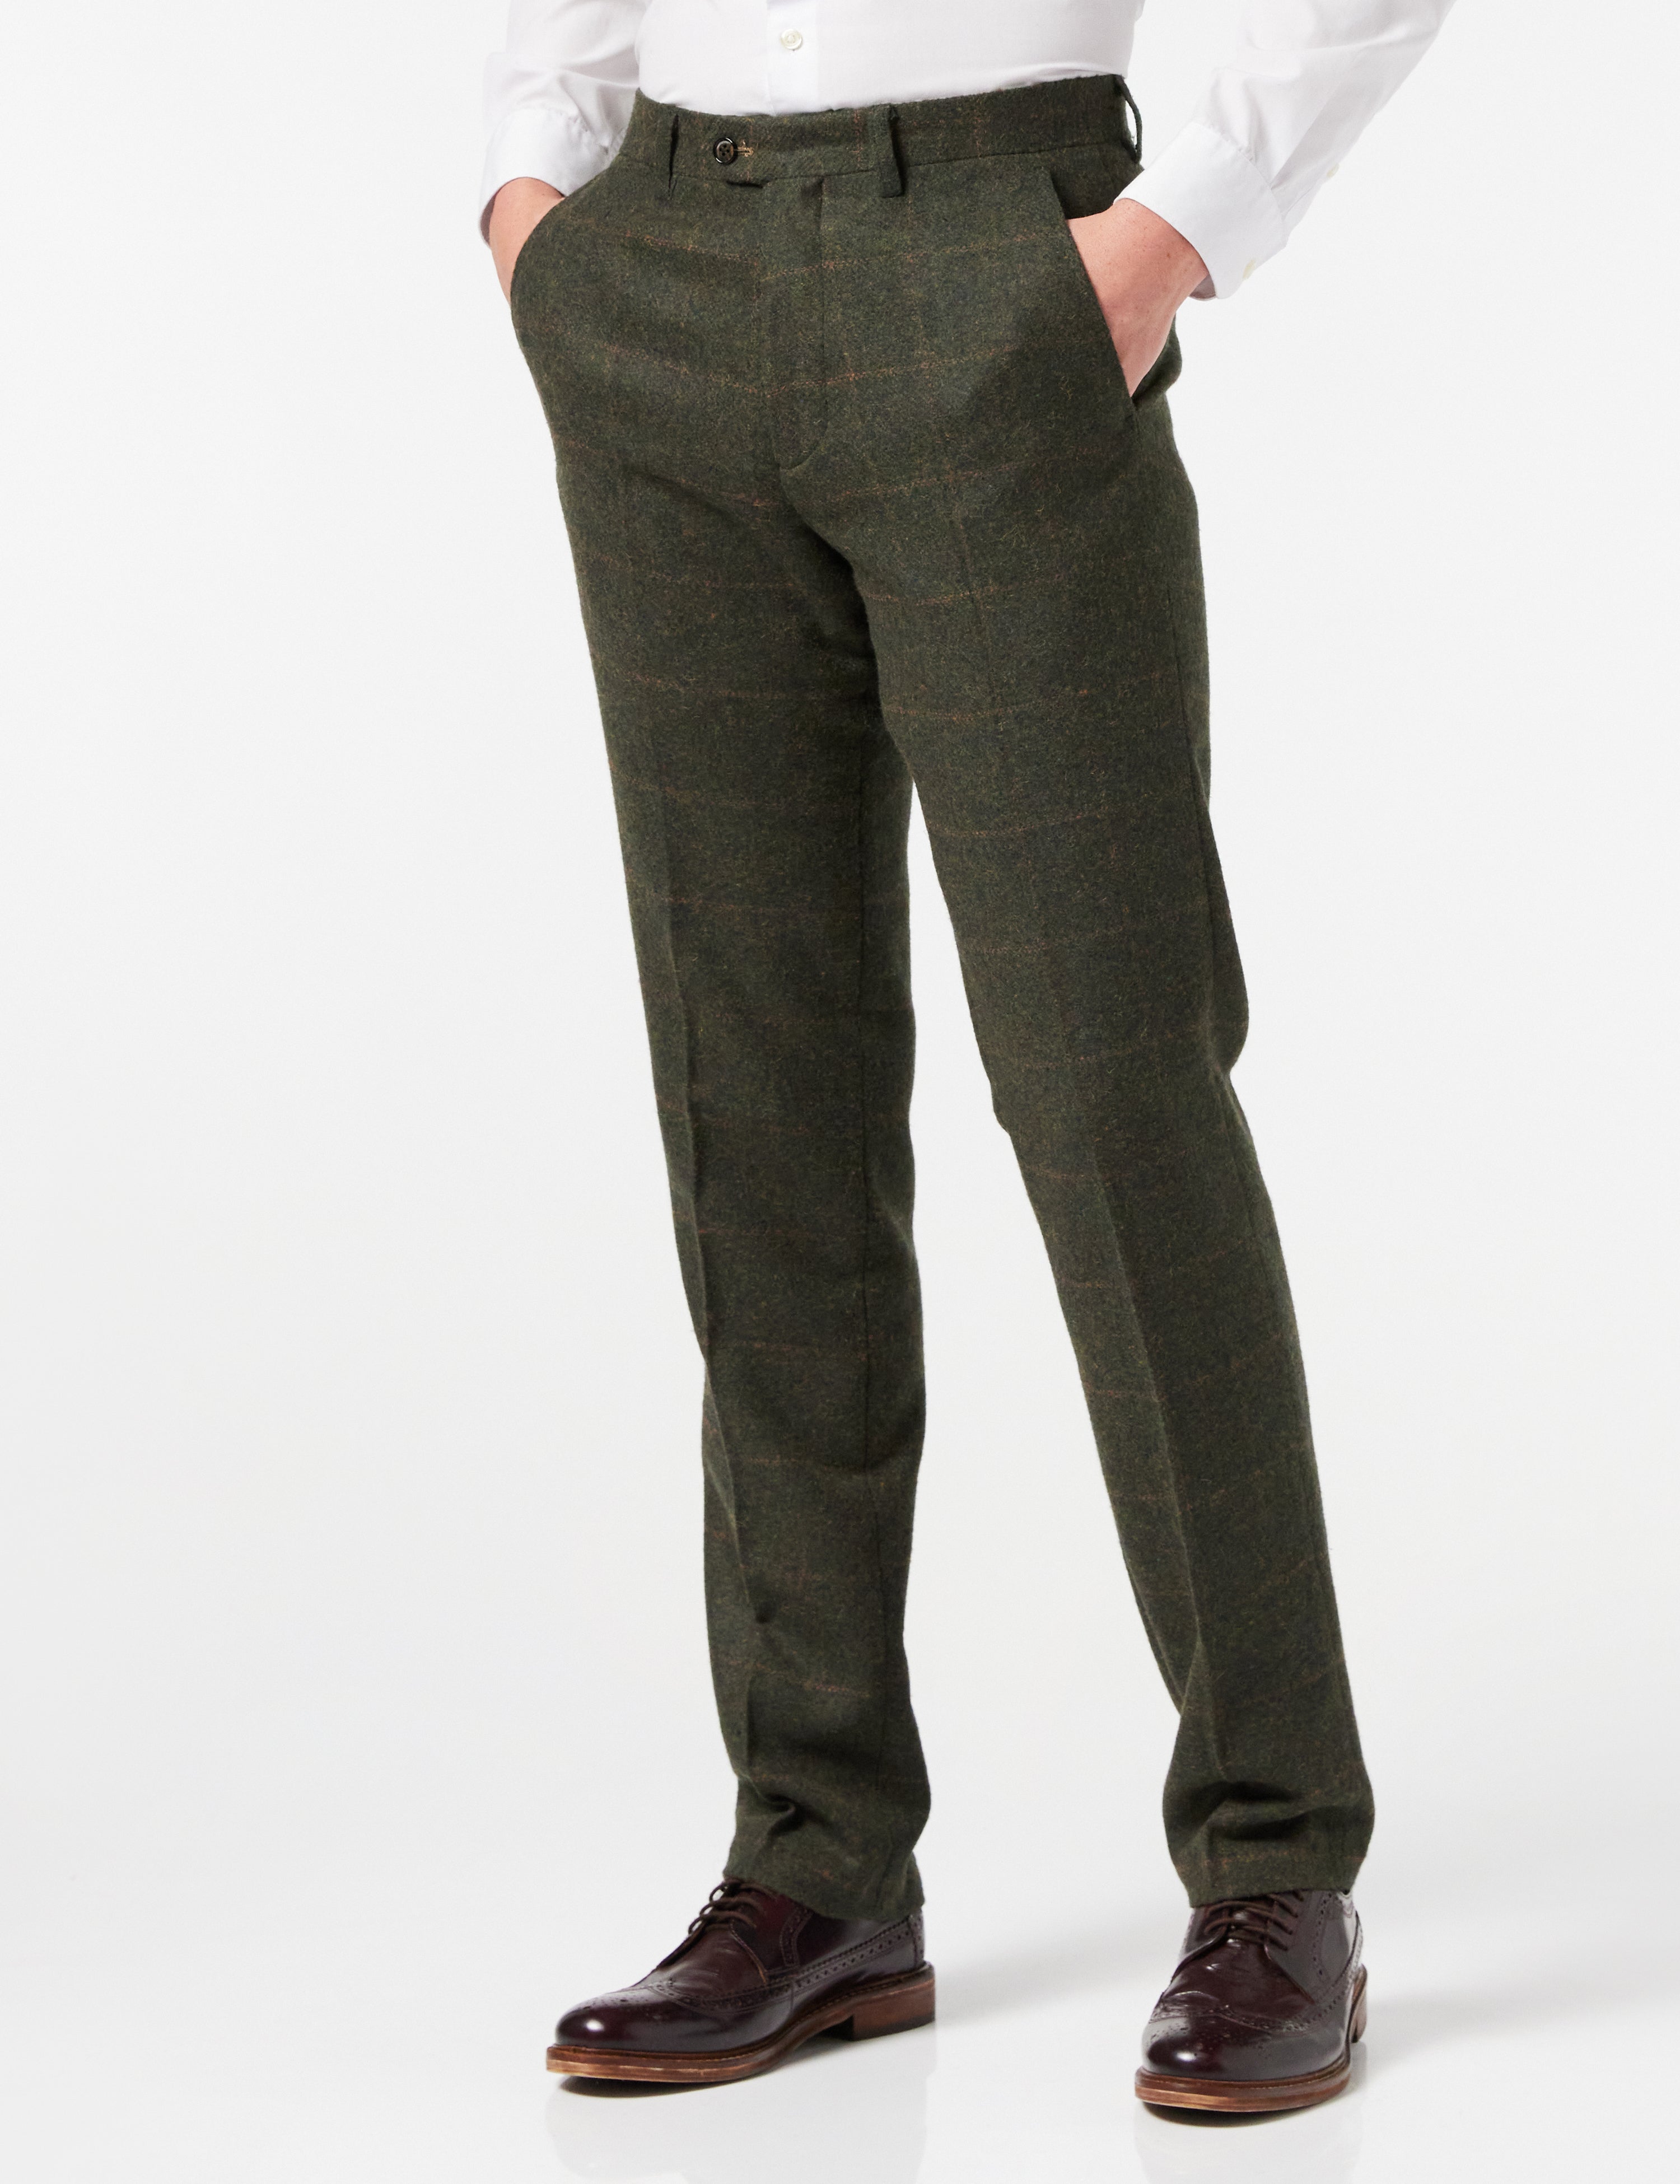 Green Tweed Check Suit Trouser